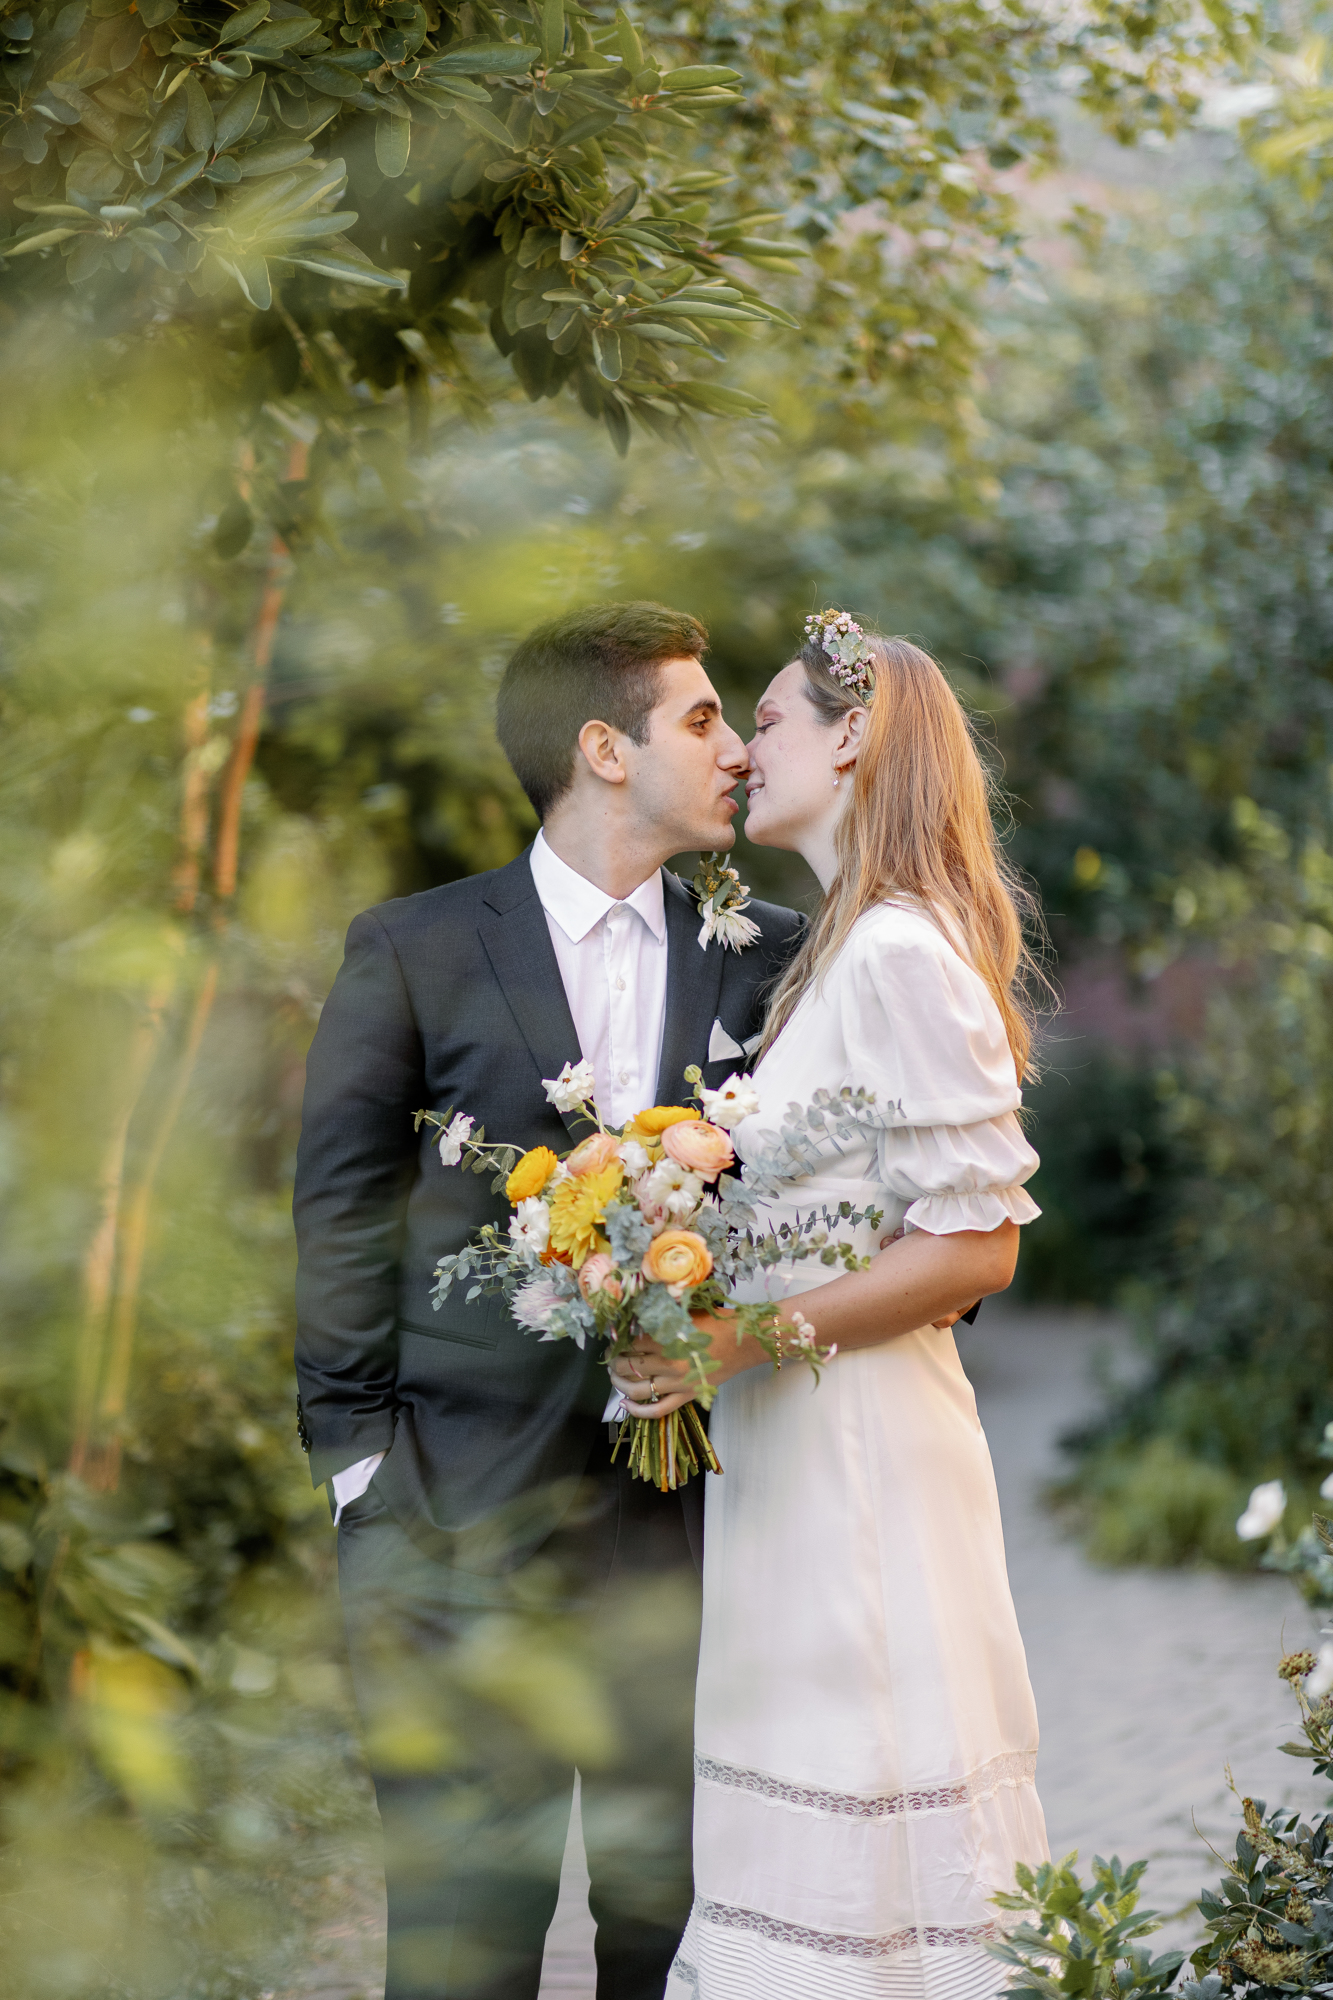 Lovely Elopement Photos in New York City